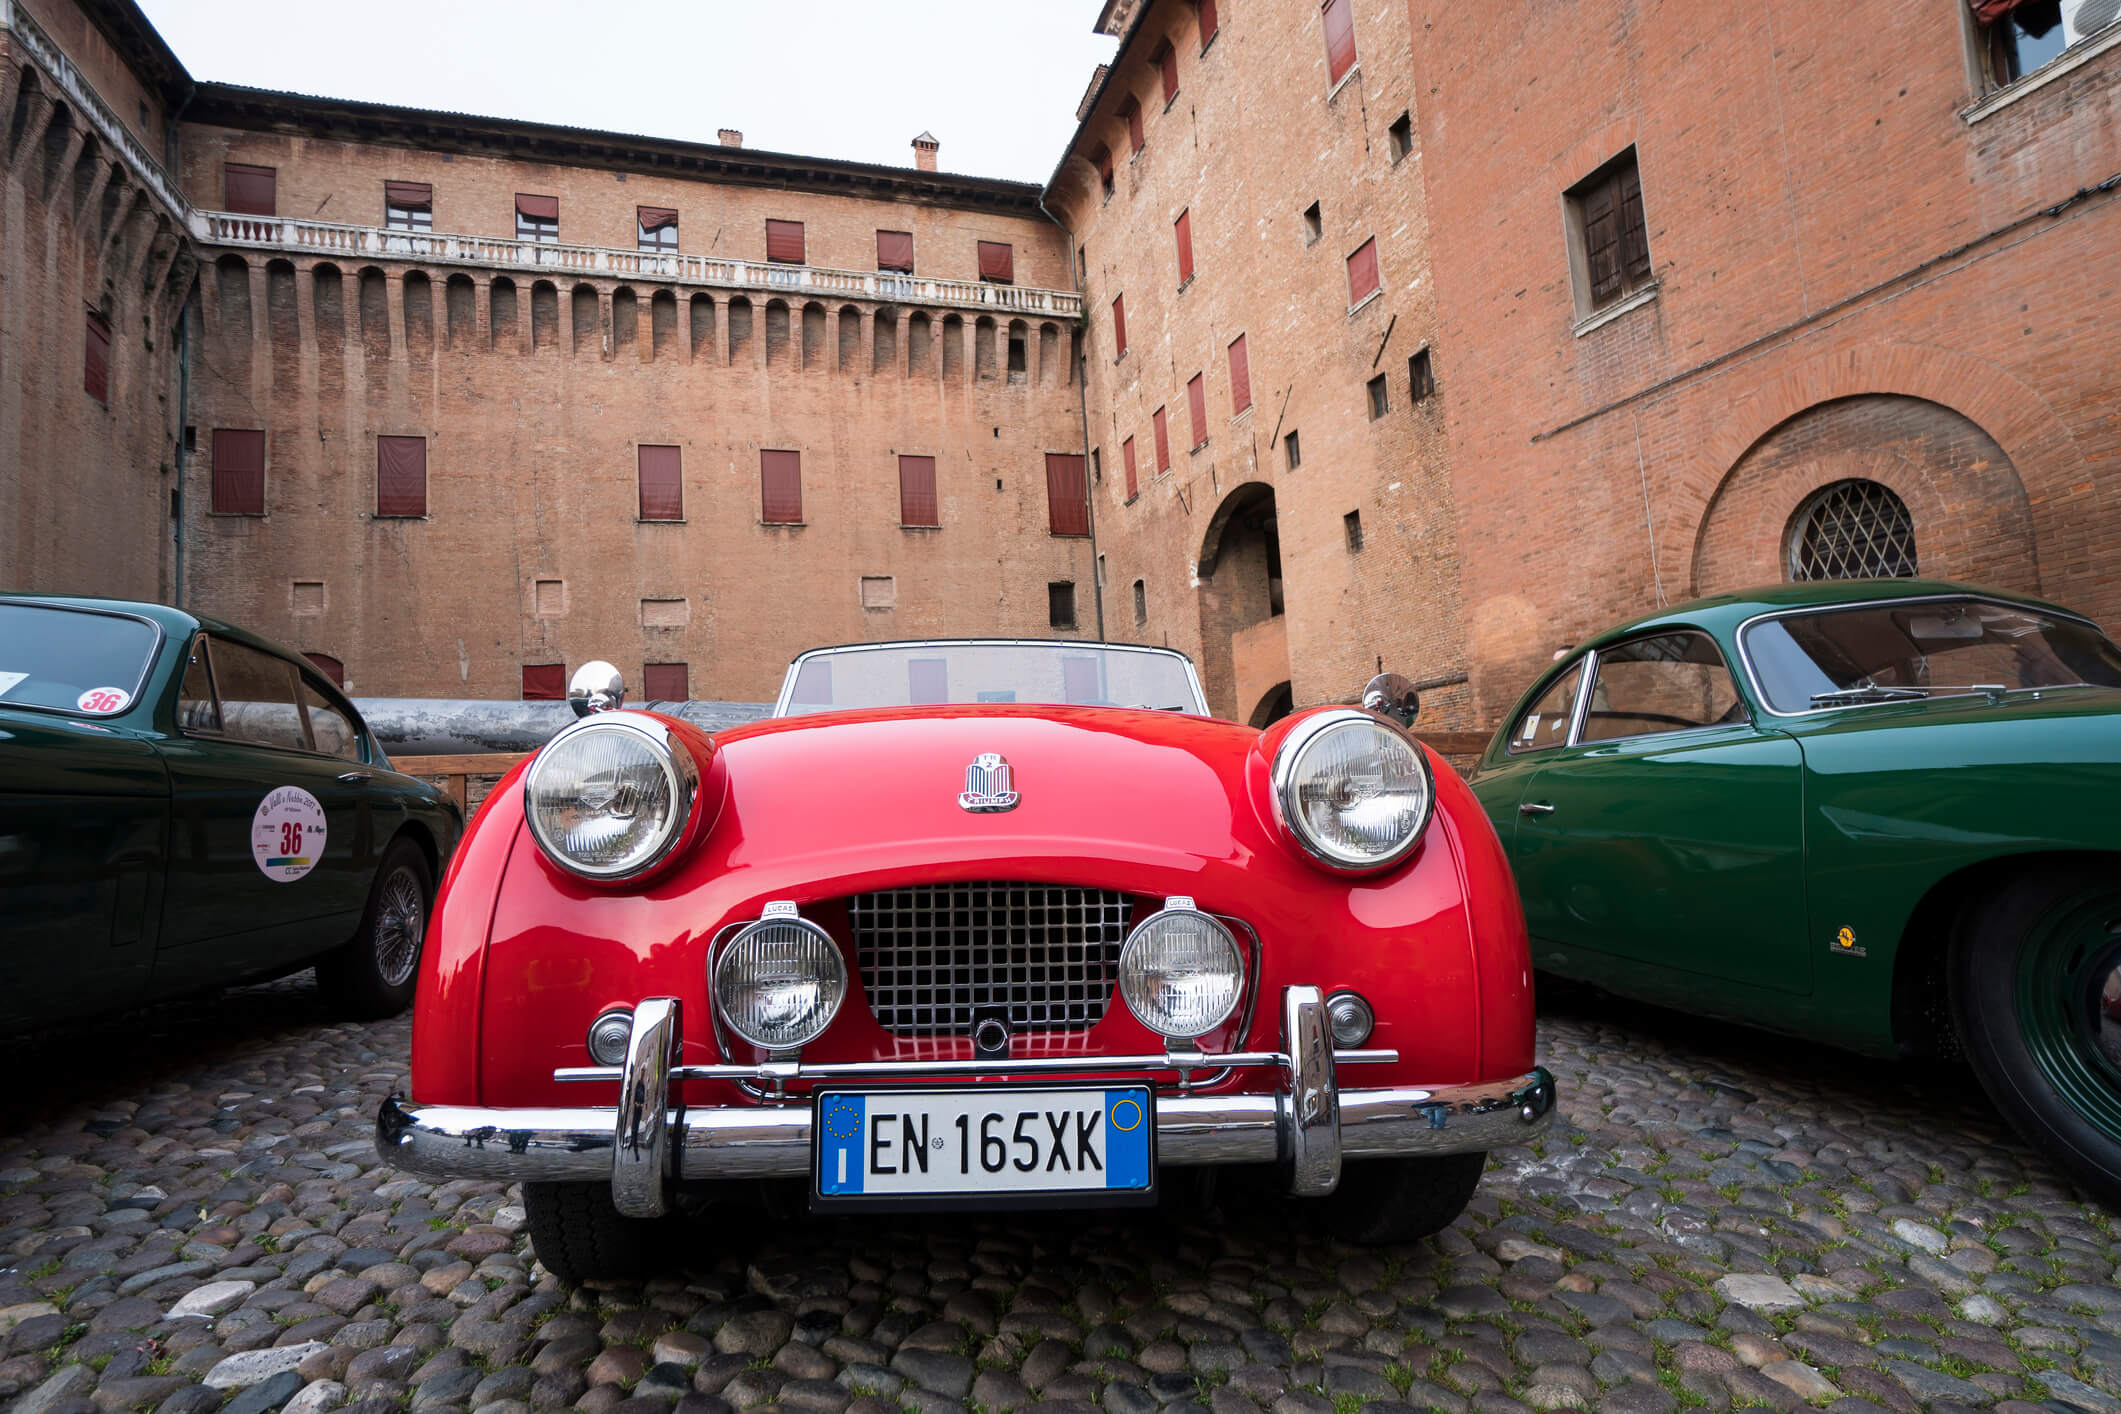 Renting cars in Lucca Tuscany